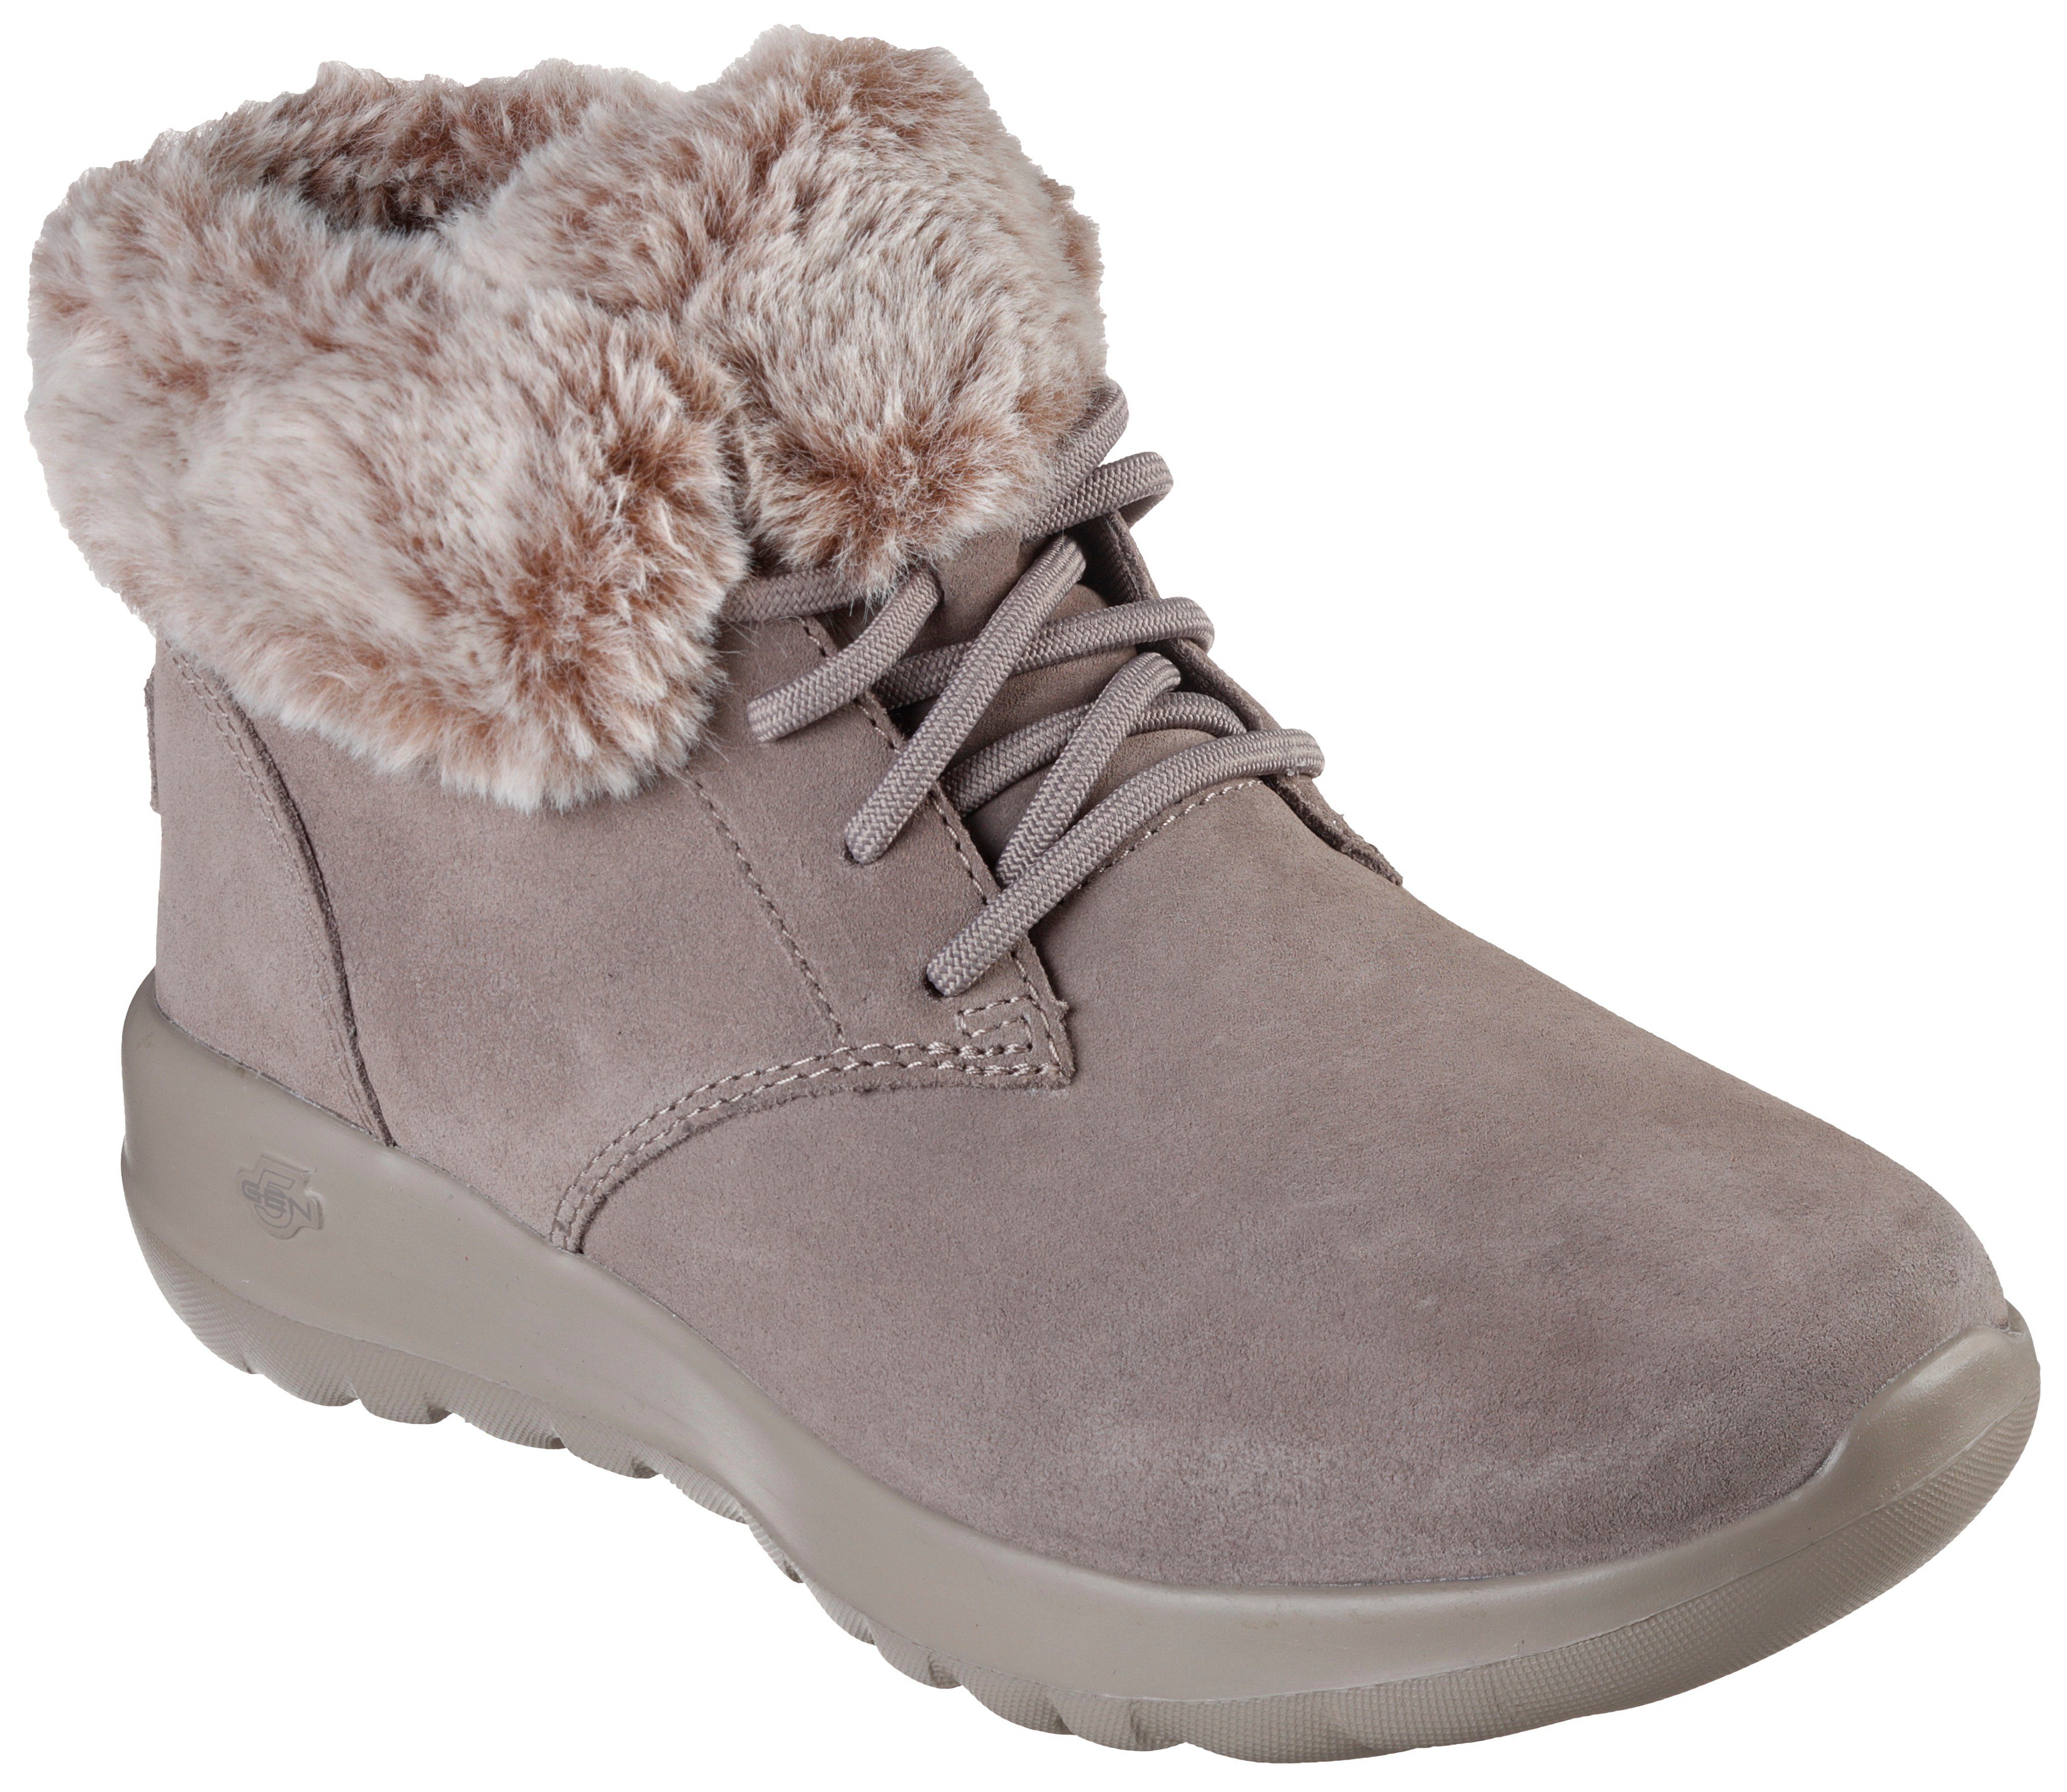 Skechers ON-THE-GO JOY - PLUSH DREAMS Winterboots mit Ortholite taupe